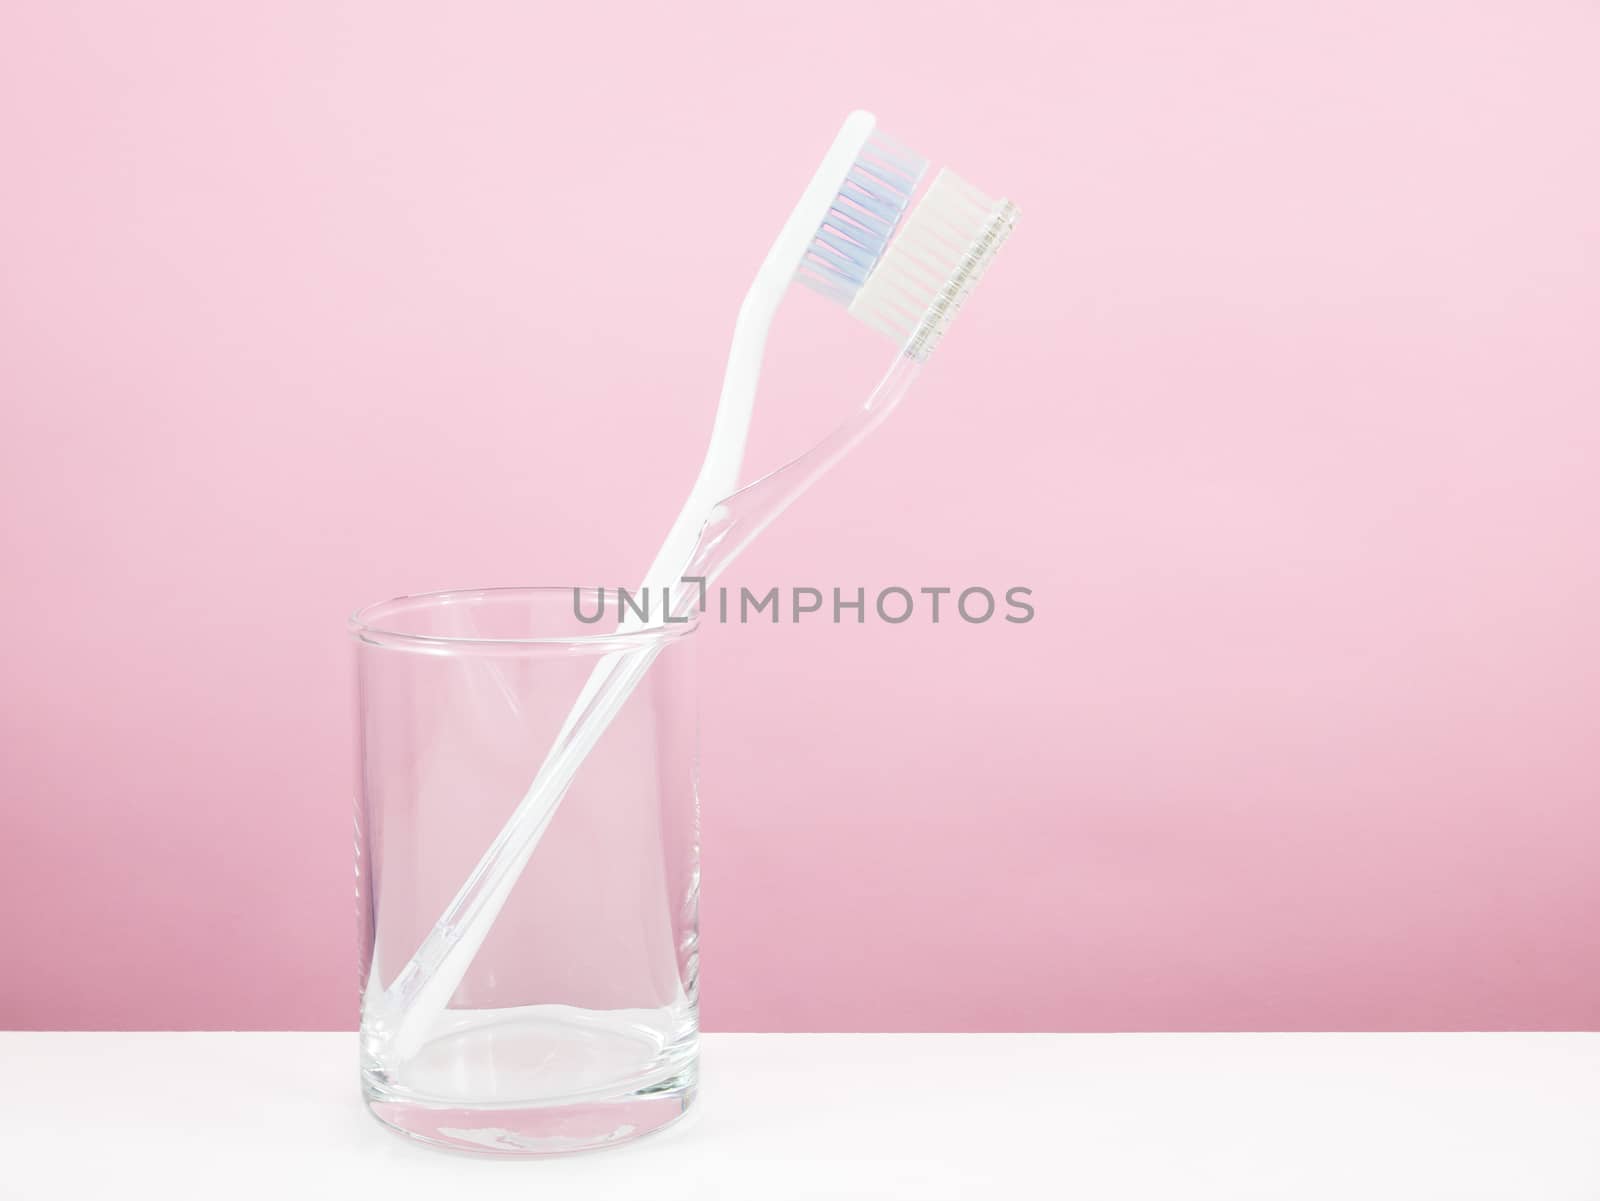 The white toothbrush with small glass by phasuthorn